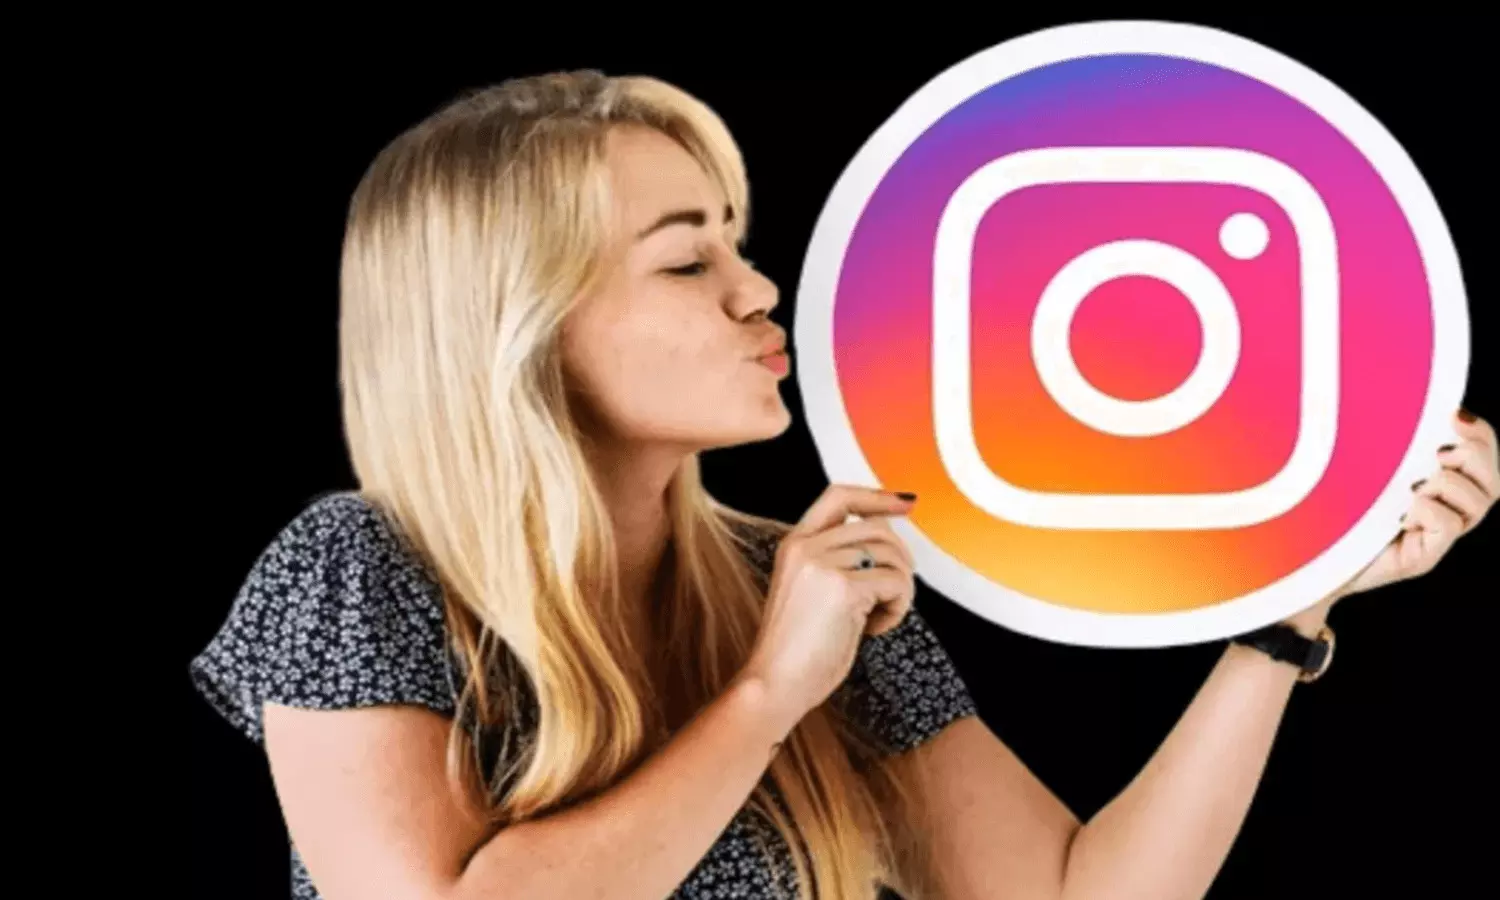 How to Gain Instagram Followers